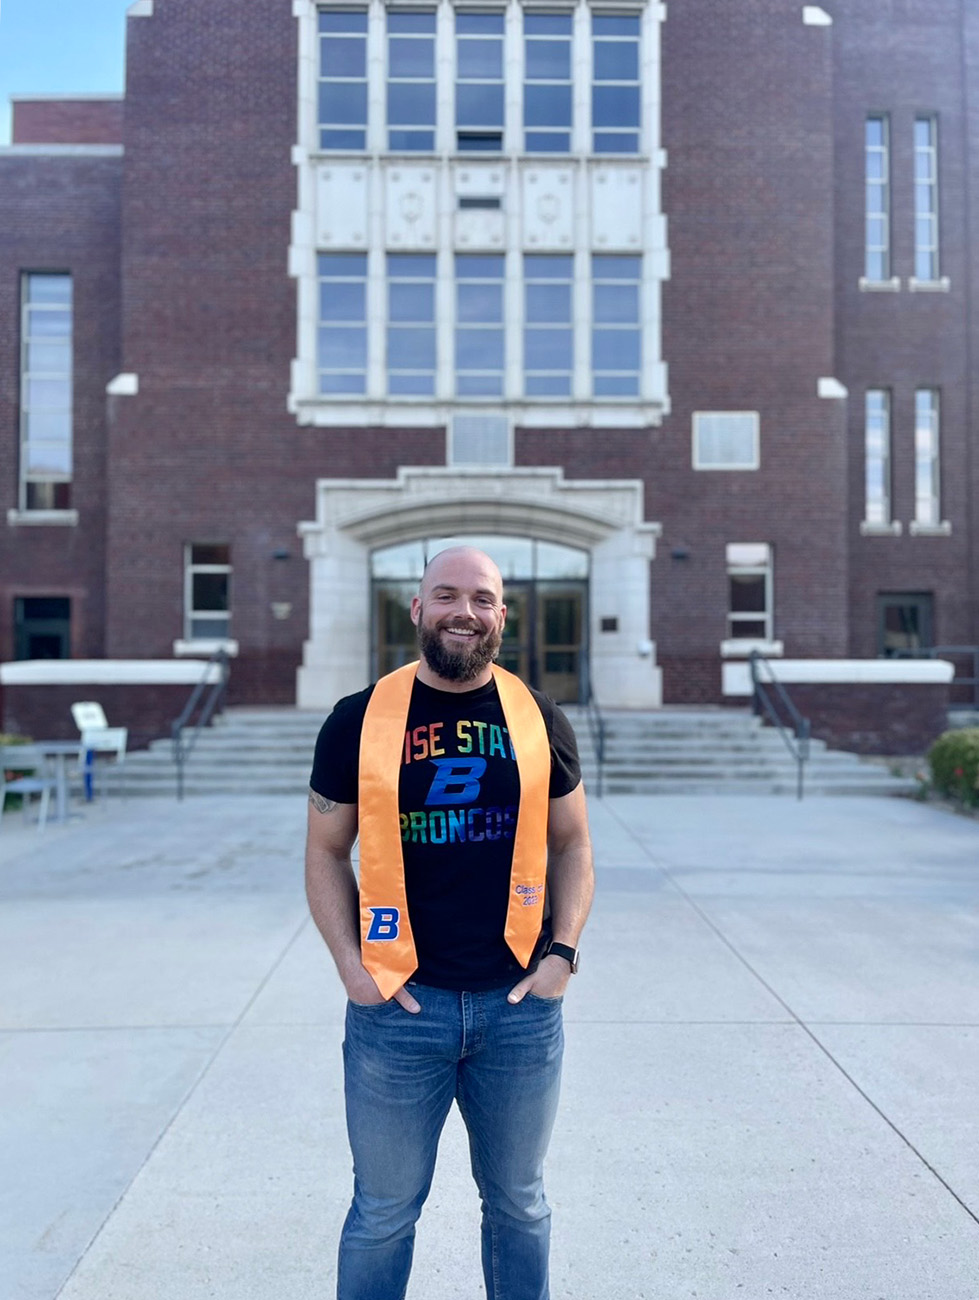 Chris Hughes wears his apricot nursing stole and stands in front of a building on campus.